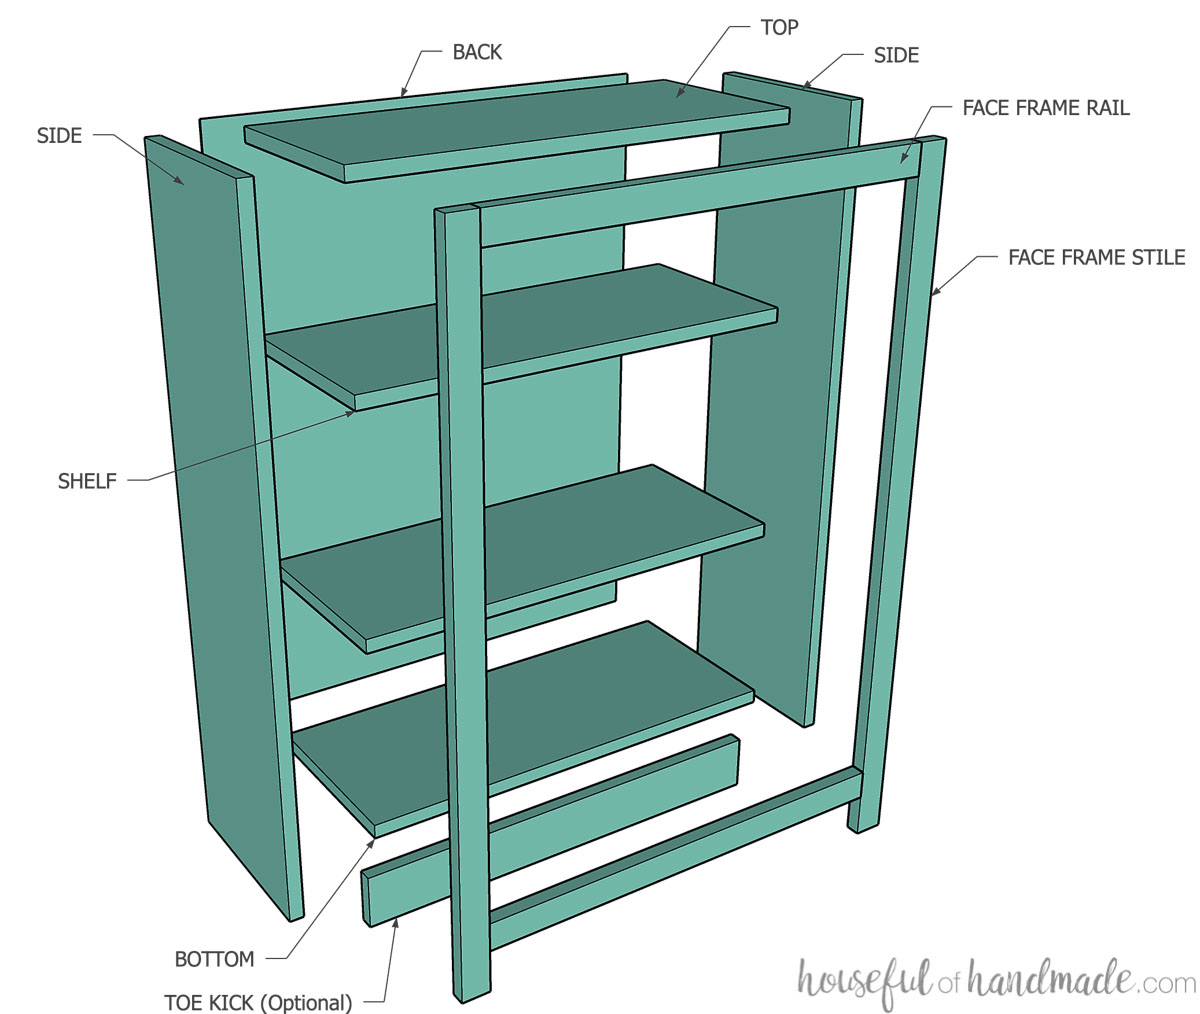 3D sketch showing the individual parts of a DIY bookcase exploded and labeled. 